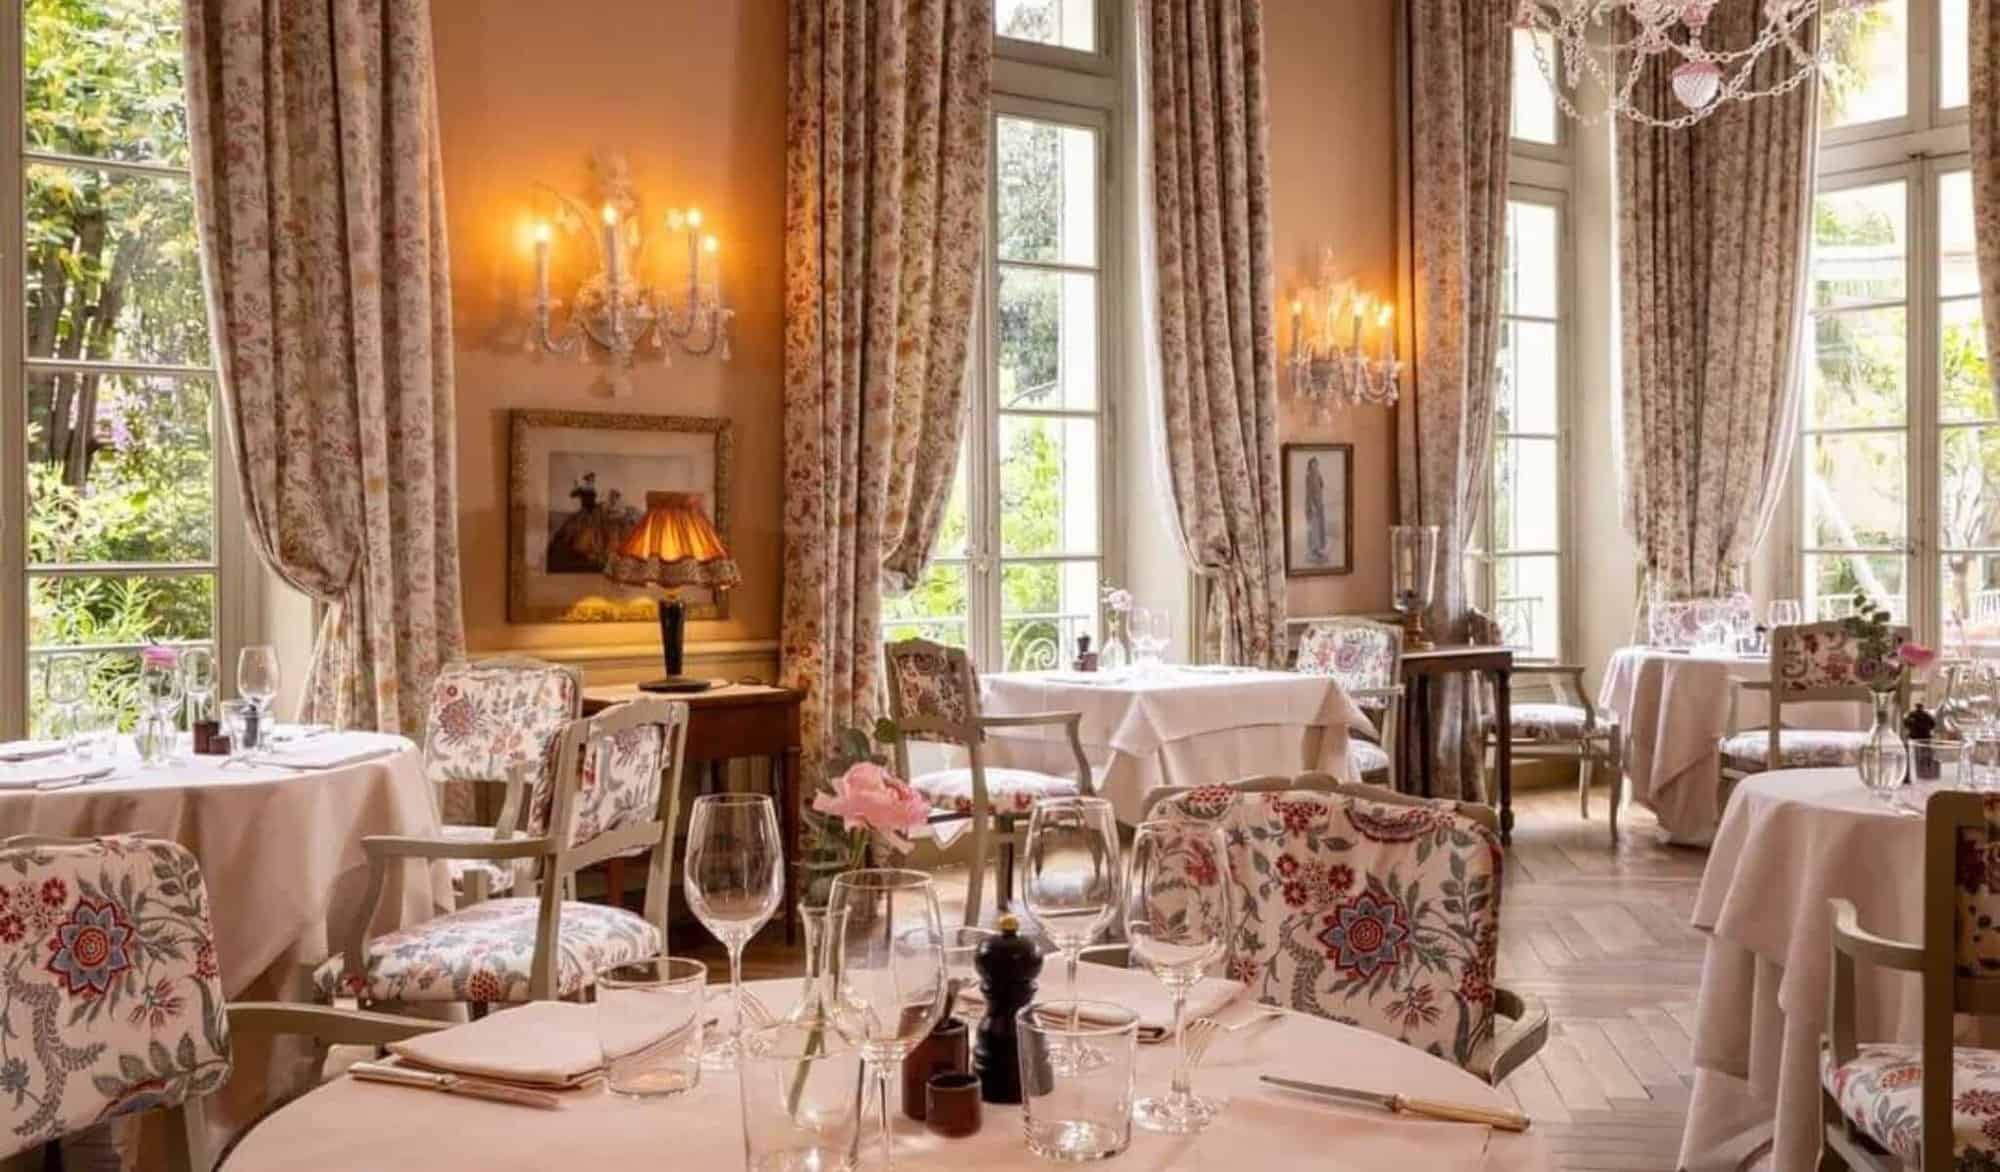 The breakfast room in La Mirande Avignon decorated in dusty rose with floral patterned curtains and upholstery, large windows and parquet flooring.